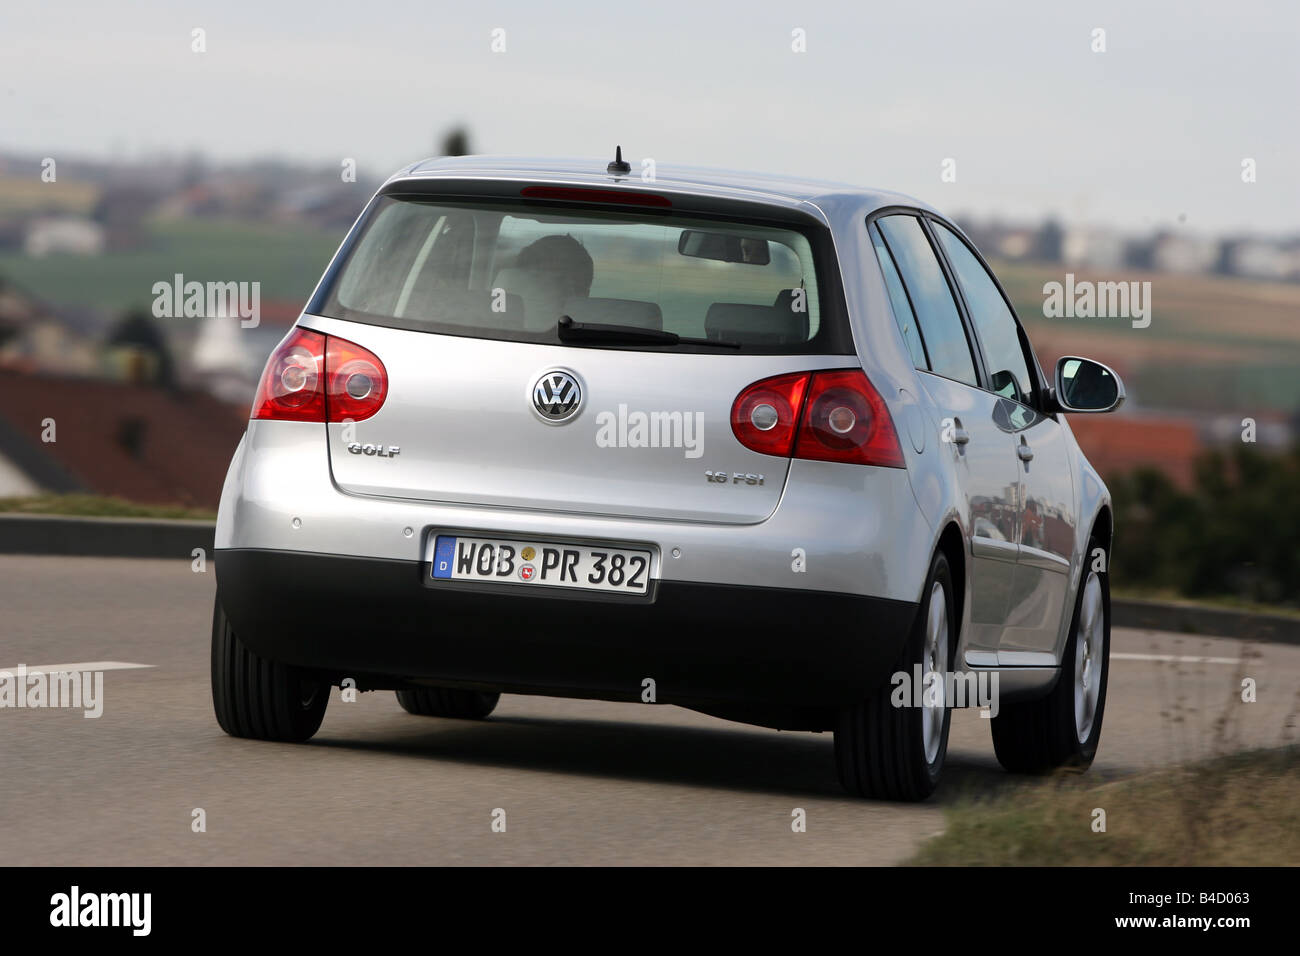 koel Machtig magie VW Volkswagen Golf 1.6 FSI Comfortline, model year 2005-, silver, driving,  diagonal from the back, rear view, country road Stock Photo - Alamy